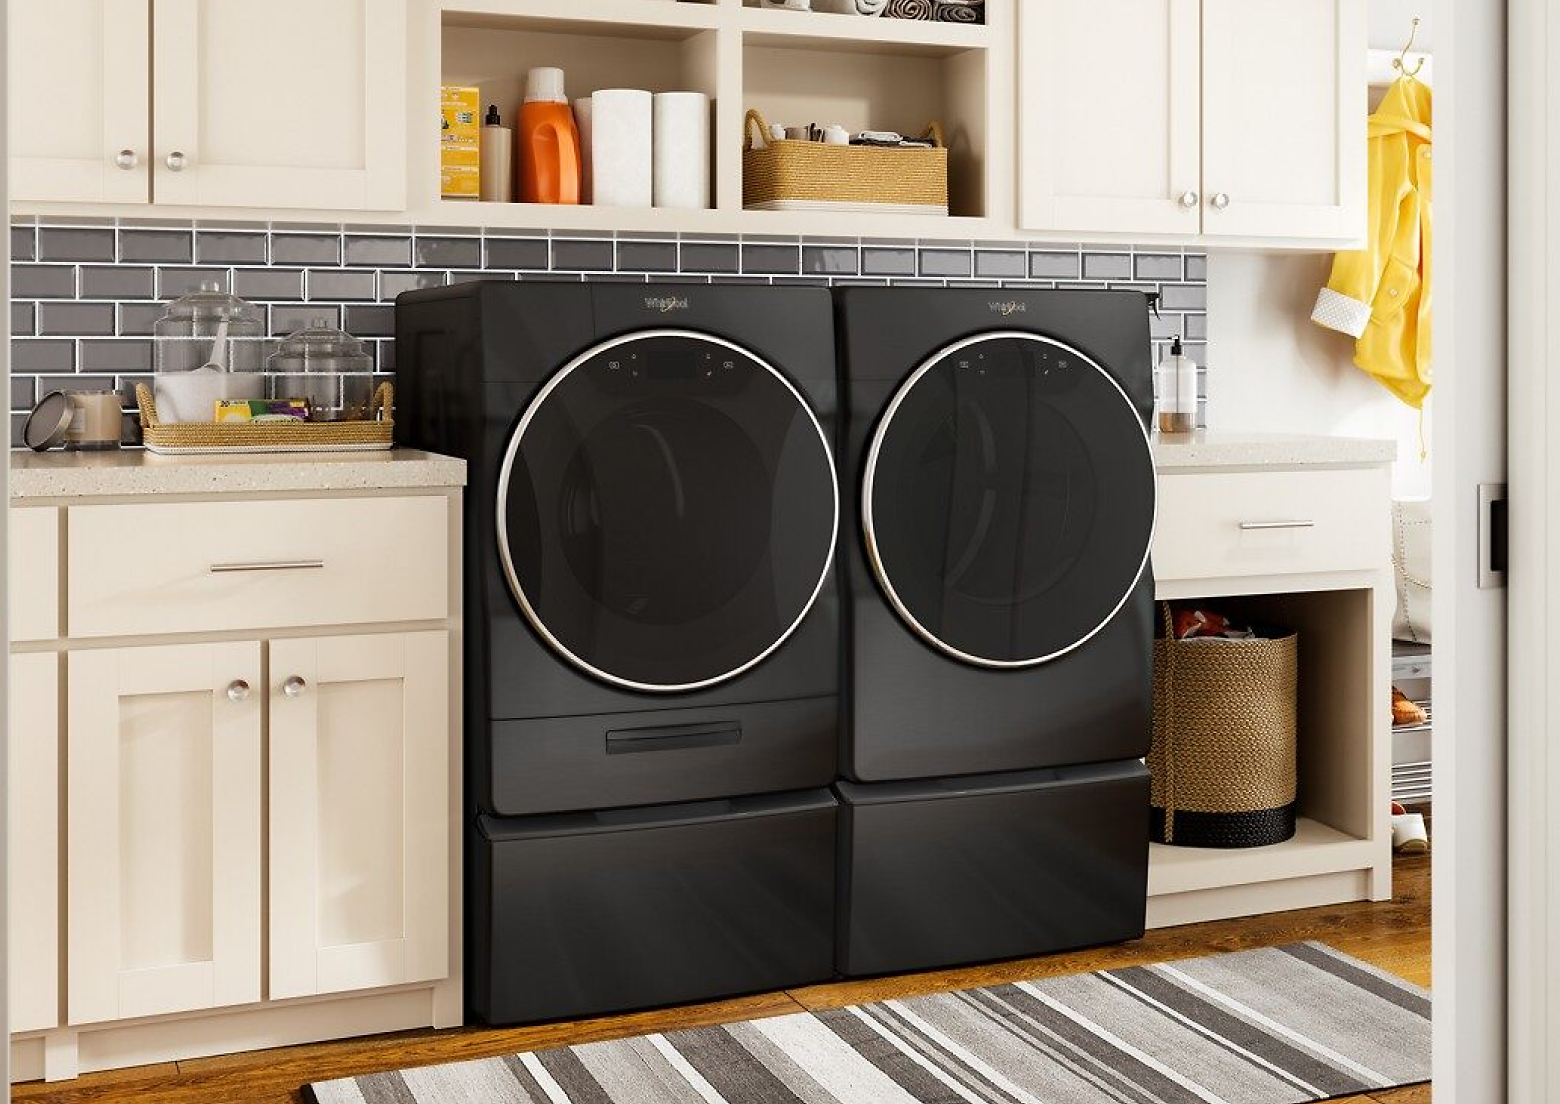 Types of Dryers: A Clothes Dryer Buying Guide | Whirlpool